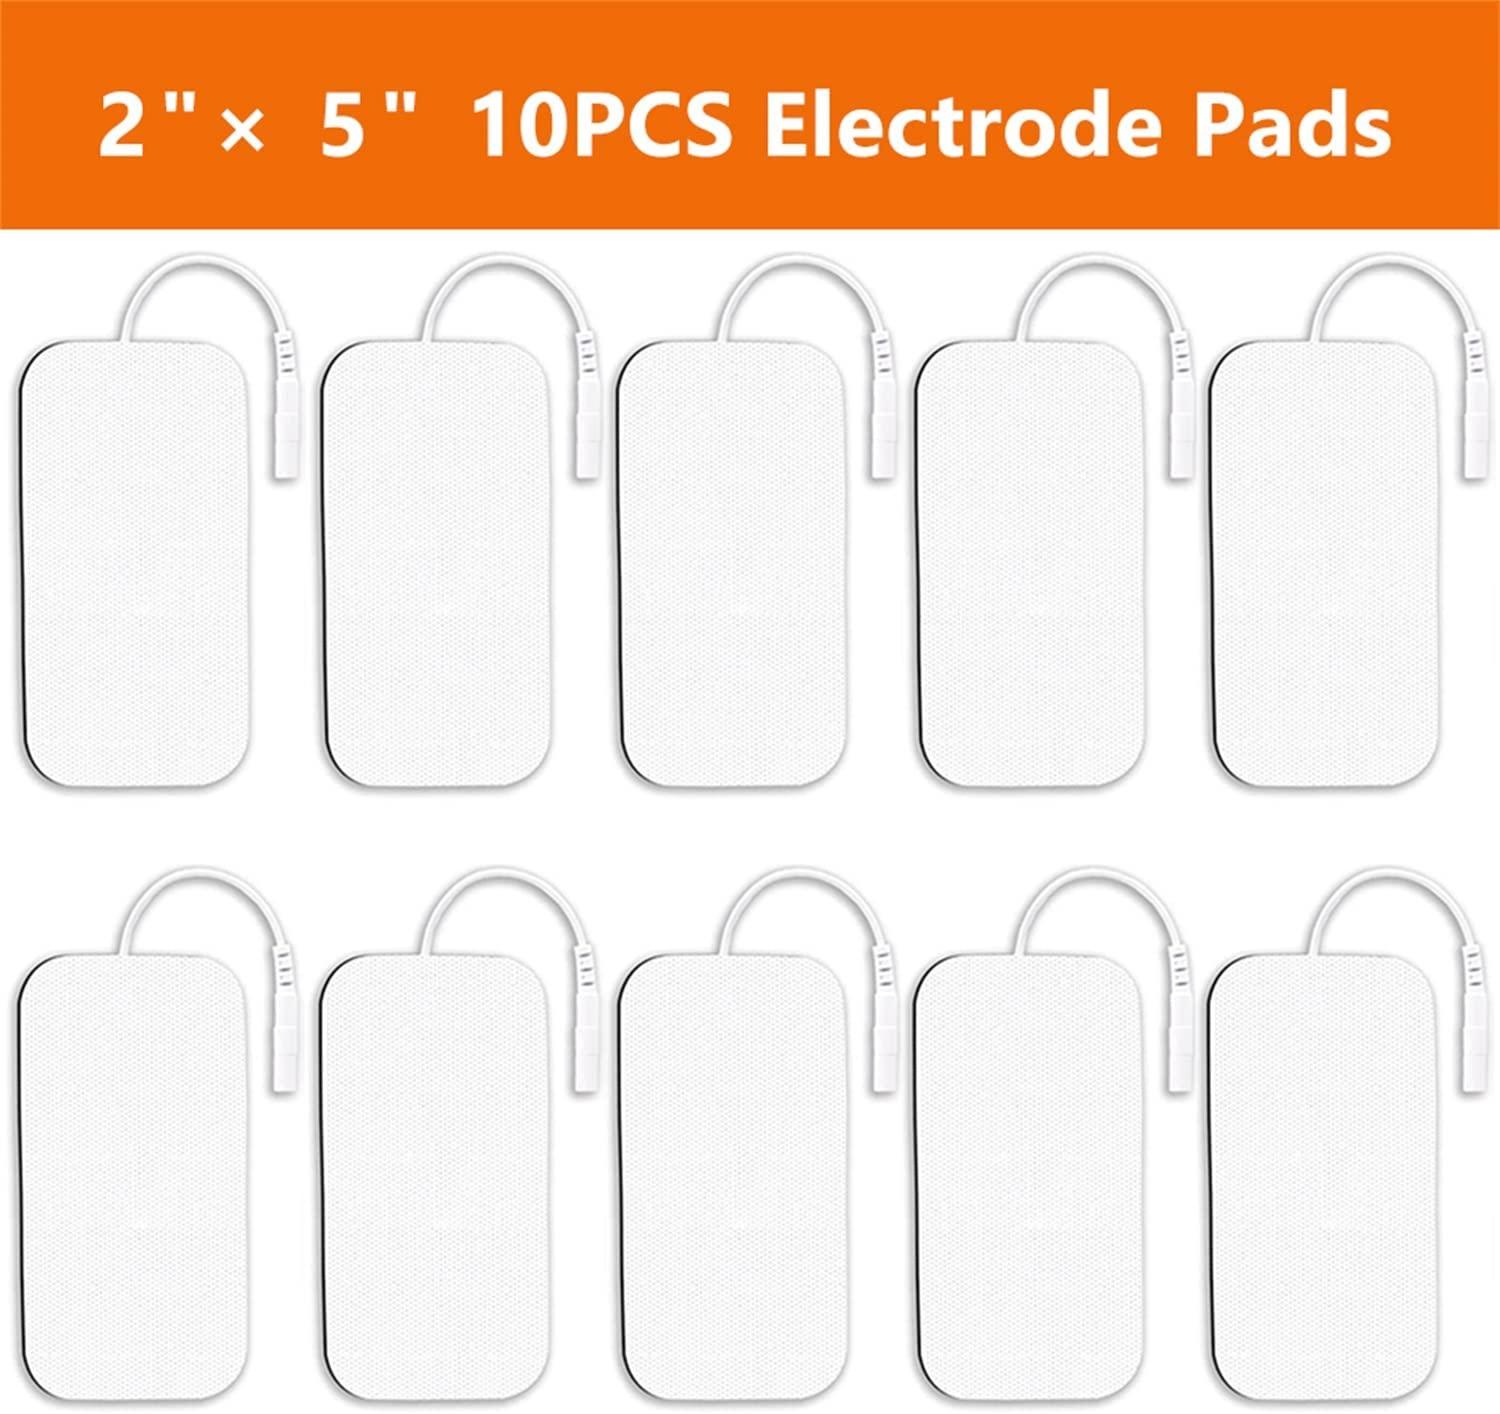 DONECO replacement pads for tens unit - 10 Pcs - 2X4 Cooling